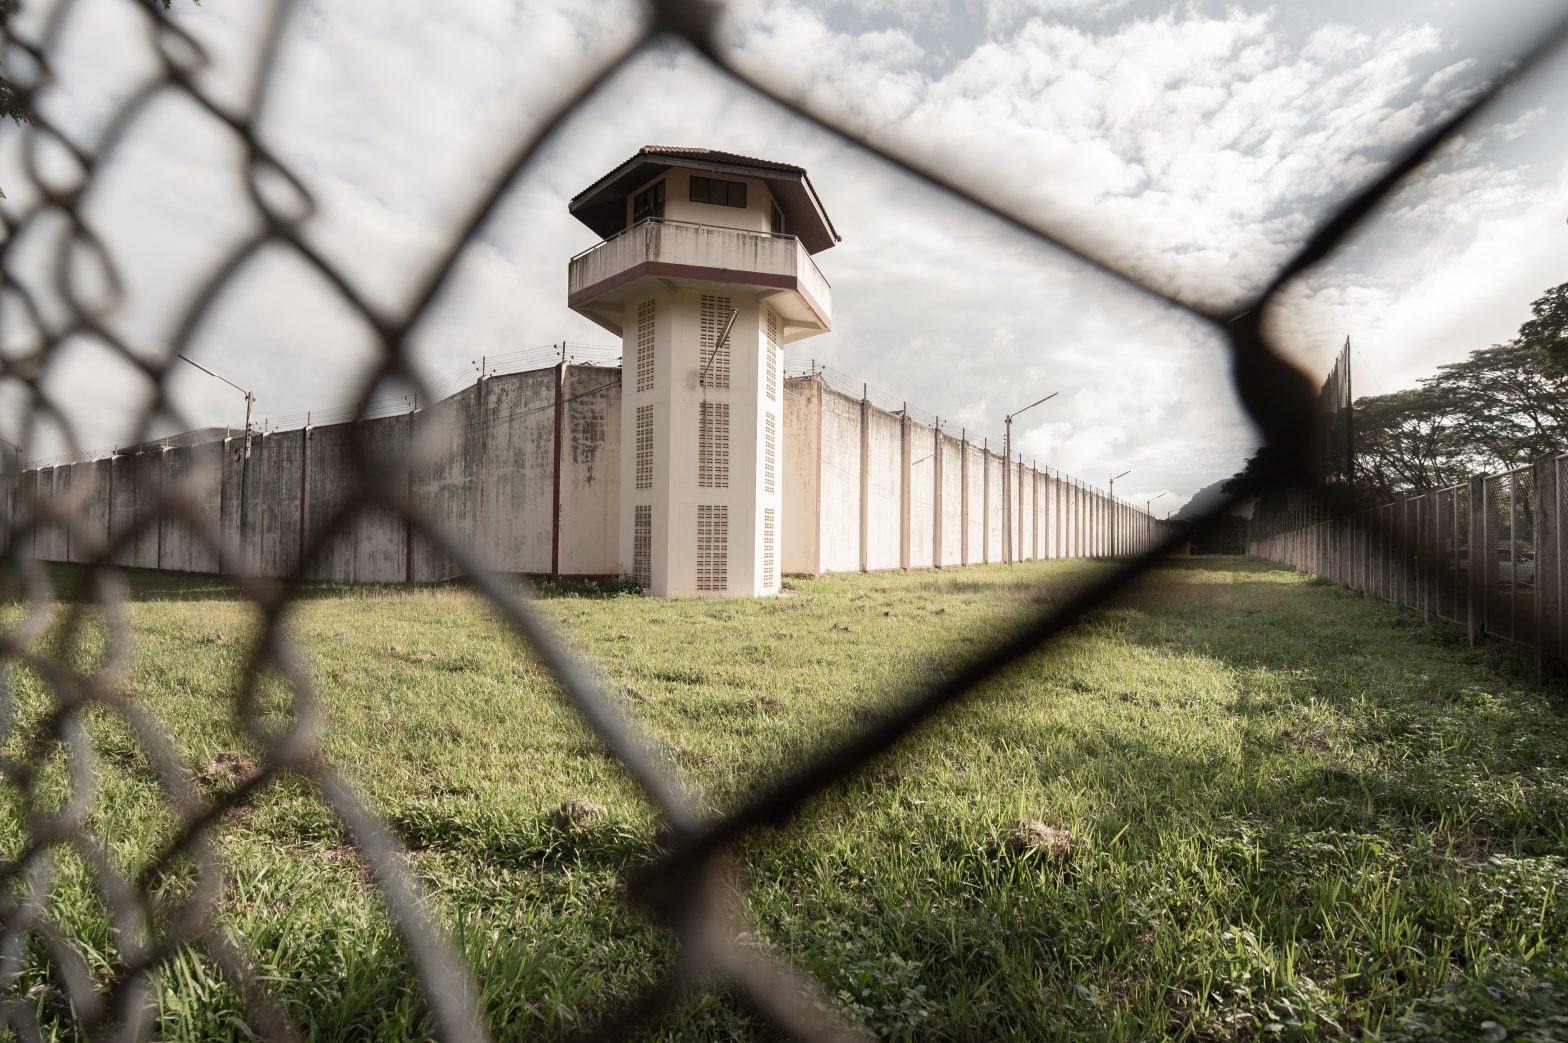 Exterior view of a prison facility surrounded by imposing iron fences.